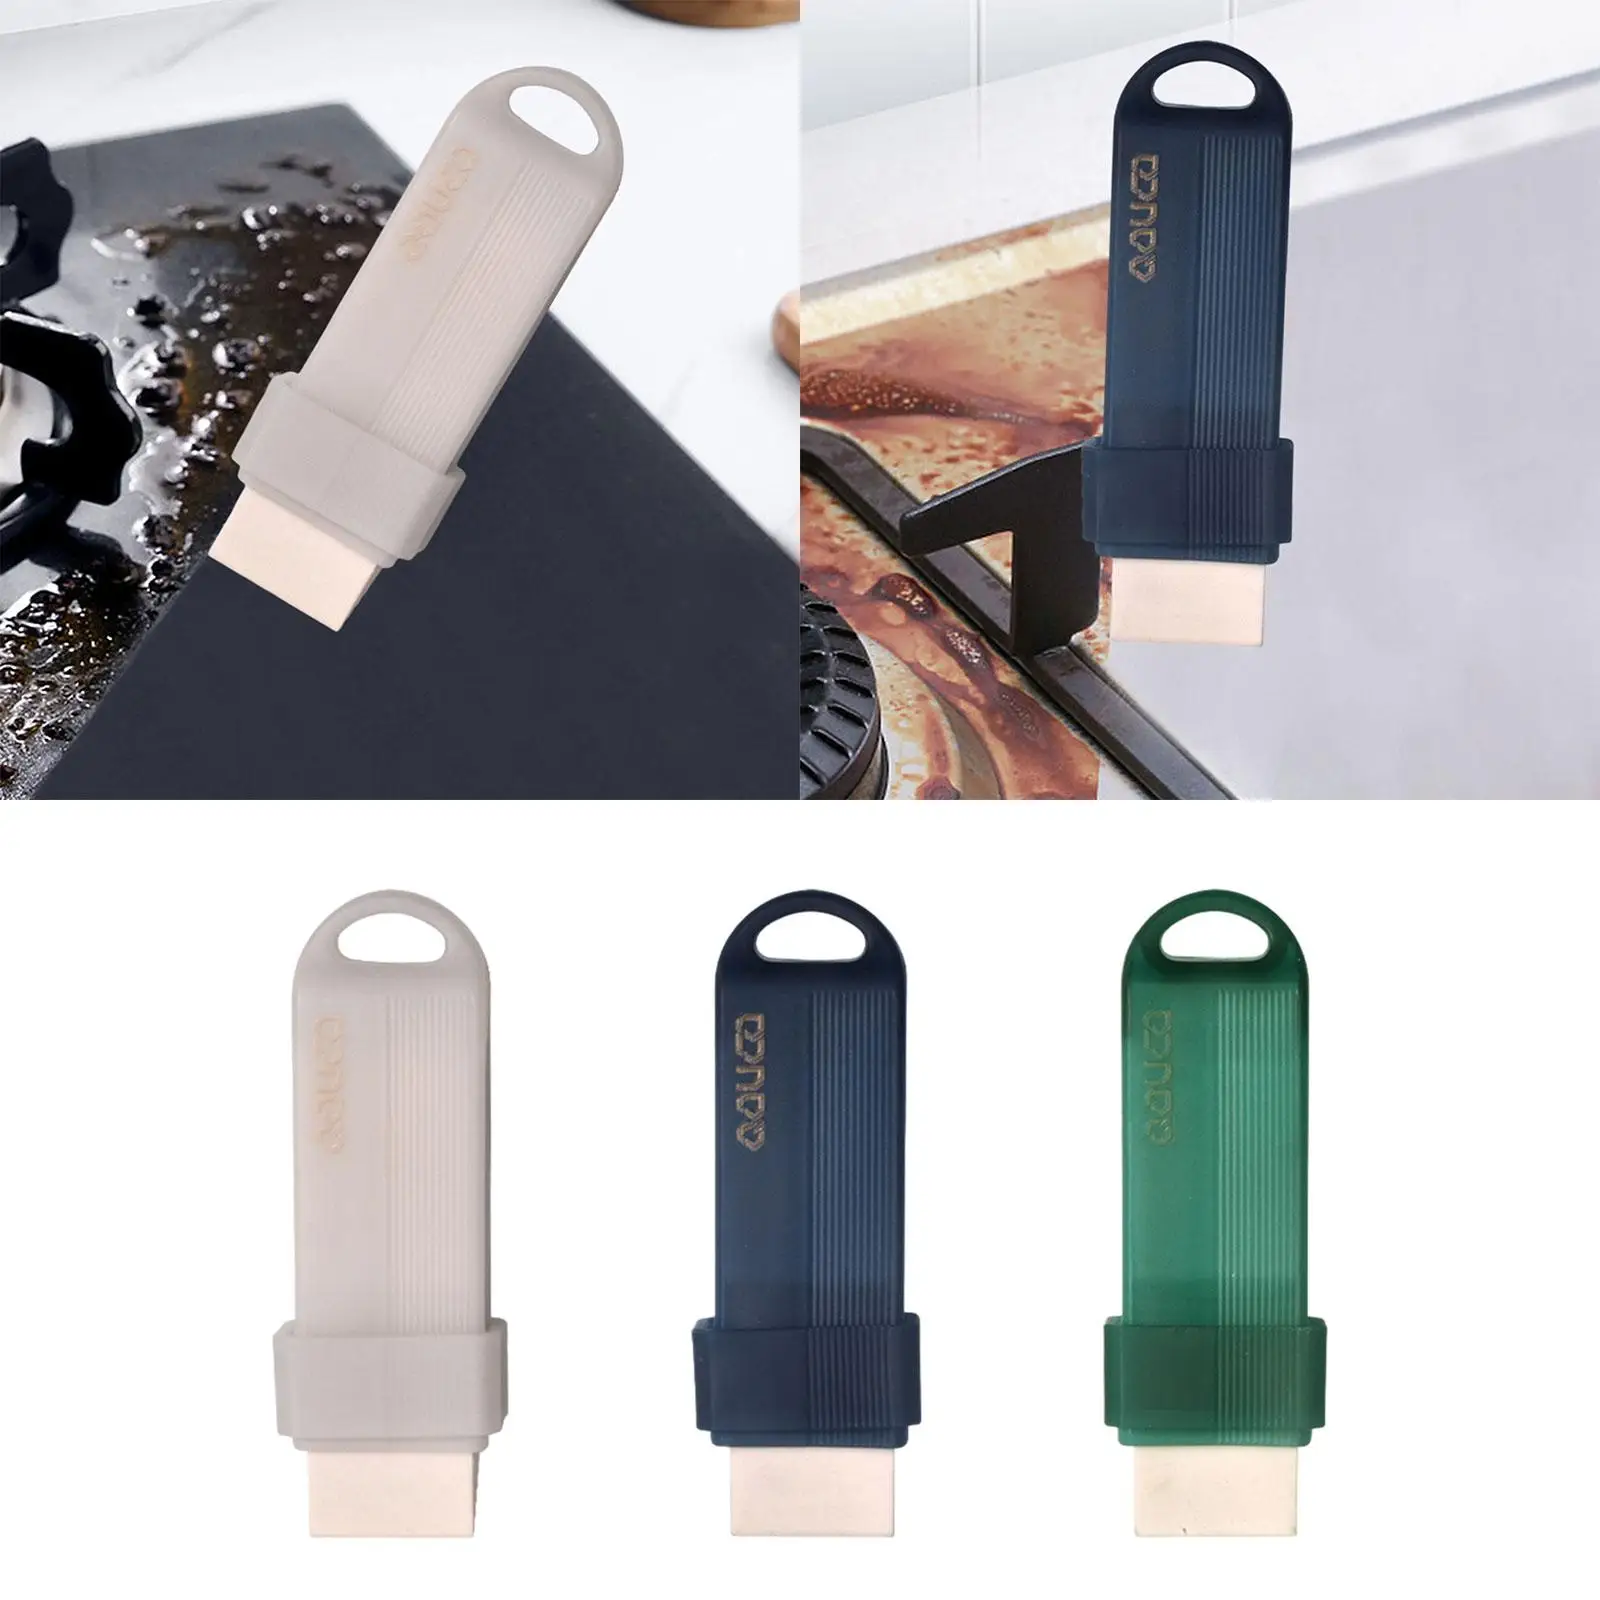 Rubber Cleaning Eraser Durable Household Cleaning Tool Lightweight Cleaner for Baseboard Kitchen Floor Dishes Shoes